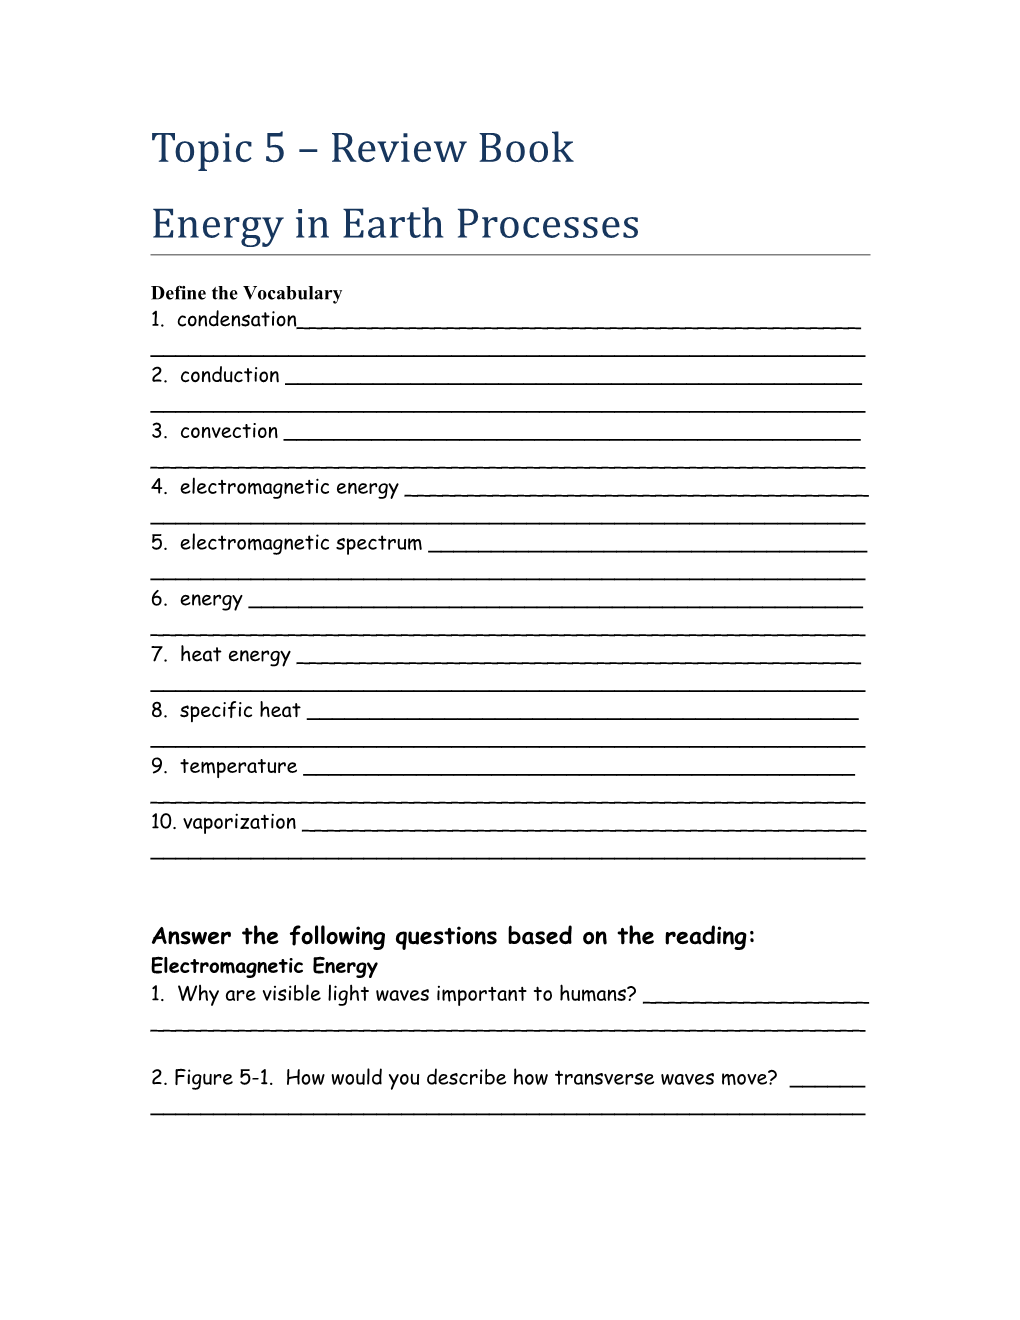 Topic 5 Energy in Earth Processes